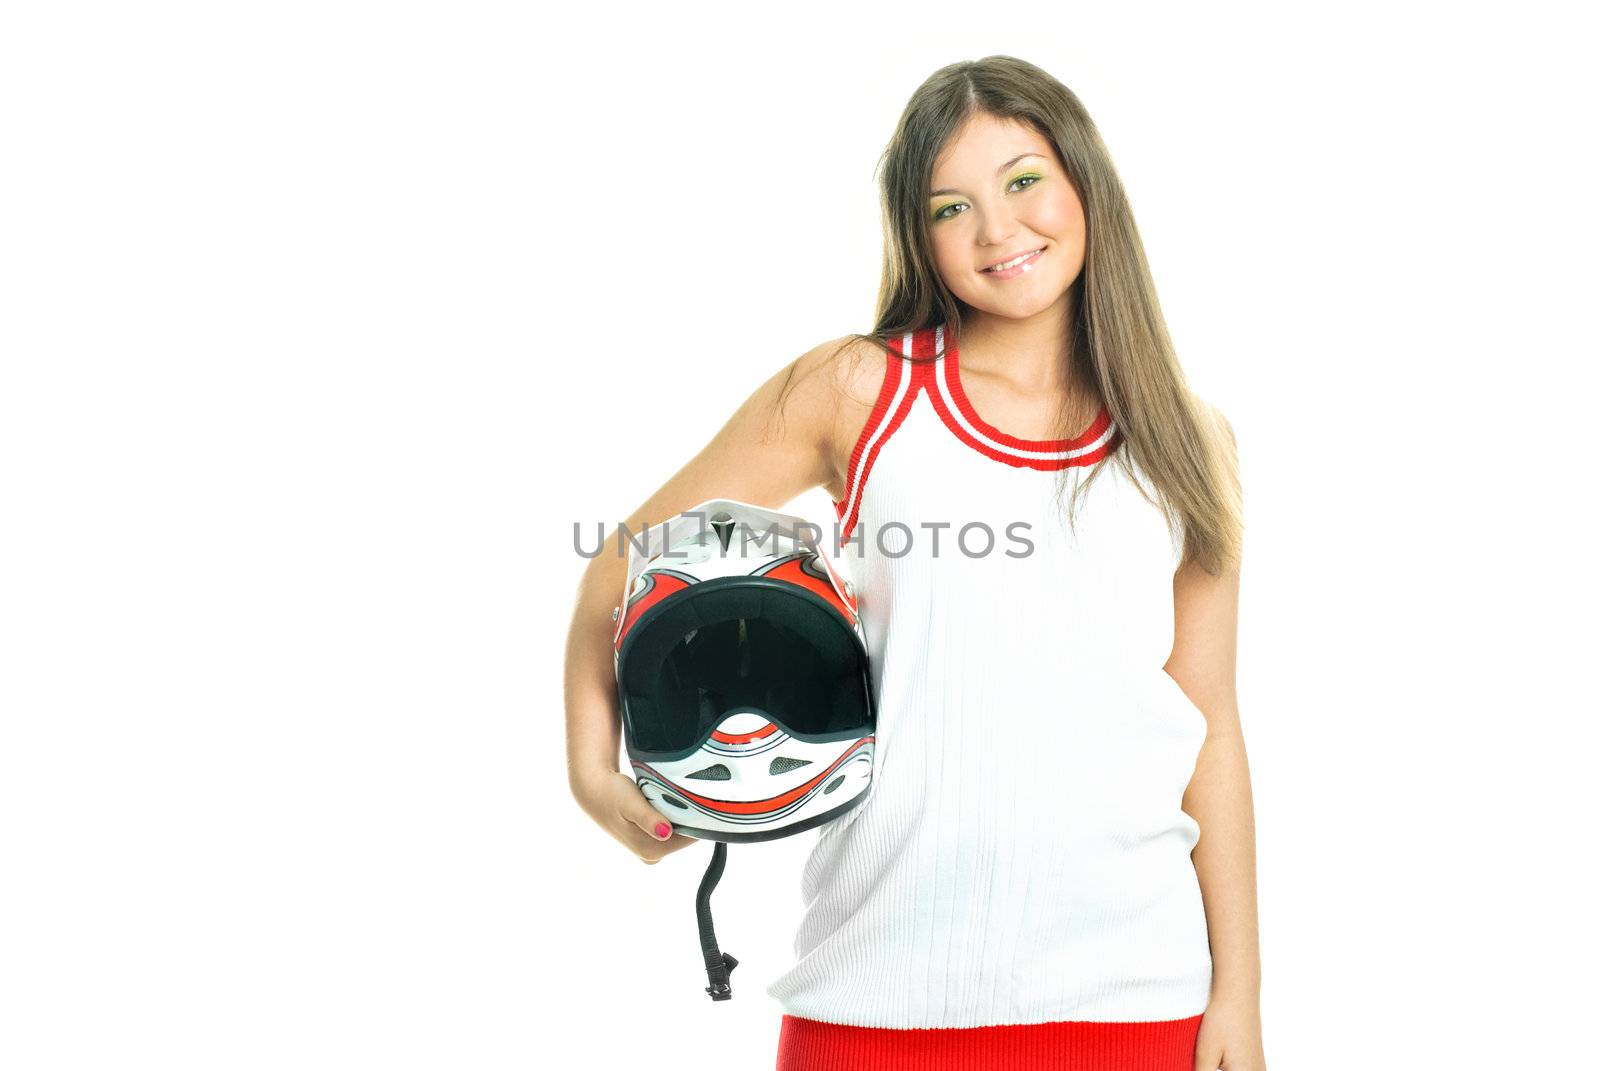 pretty young woman holding a motorcycle helmet, isolated against white background